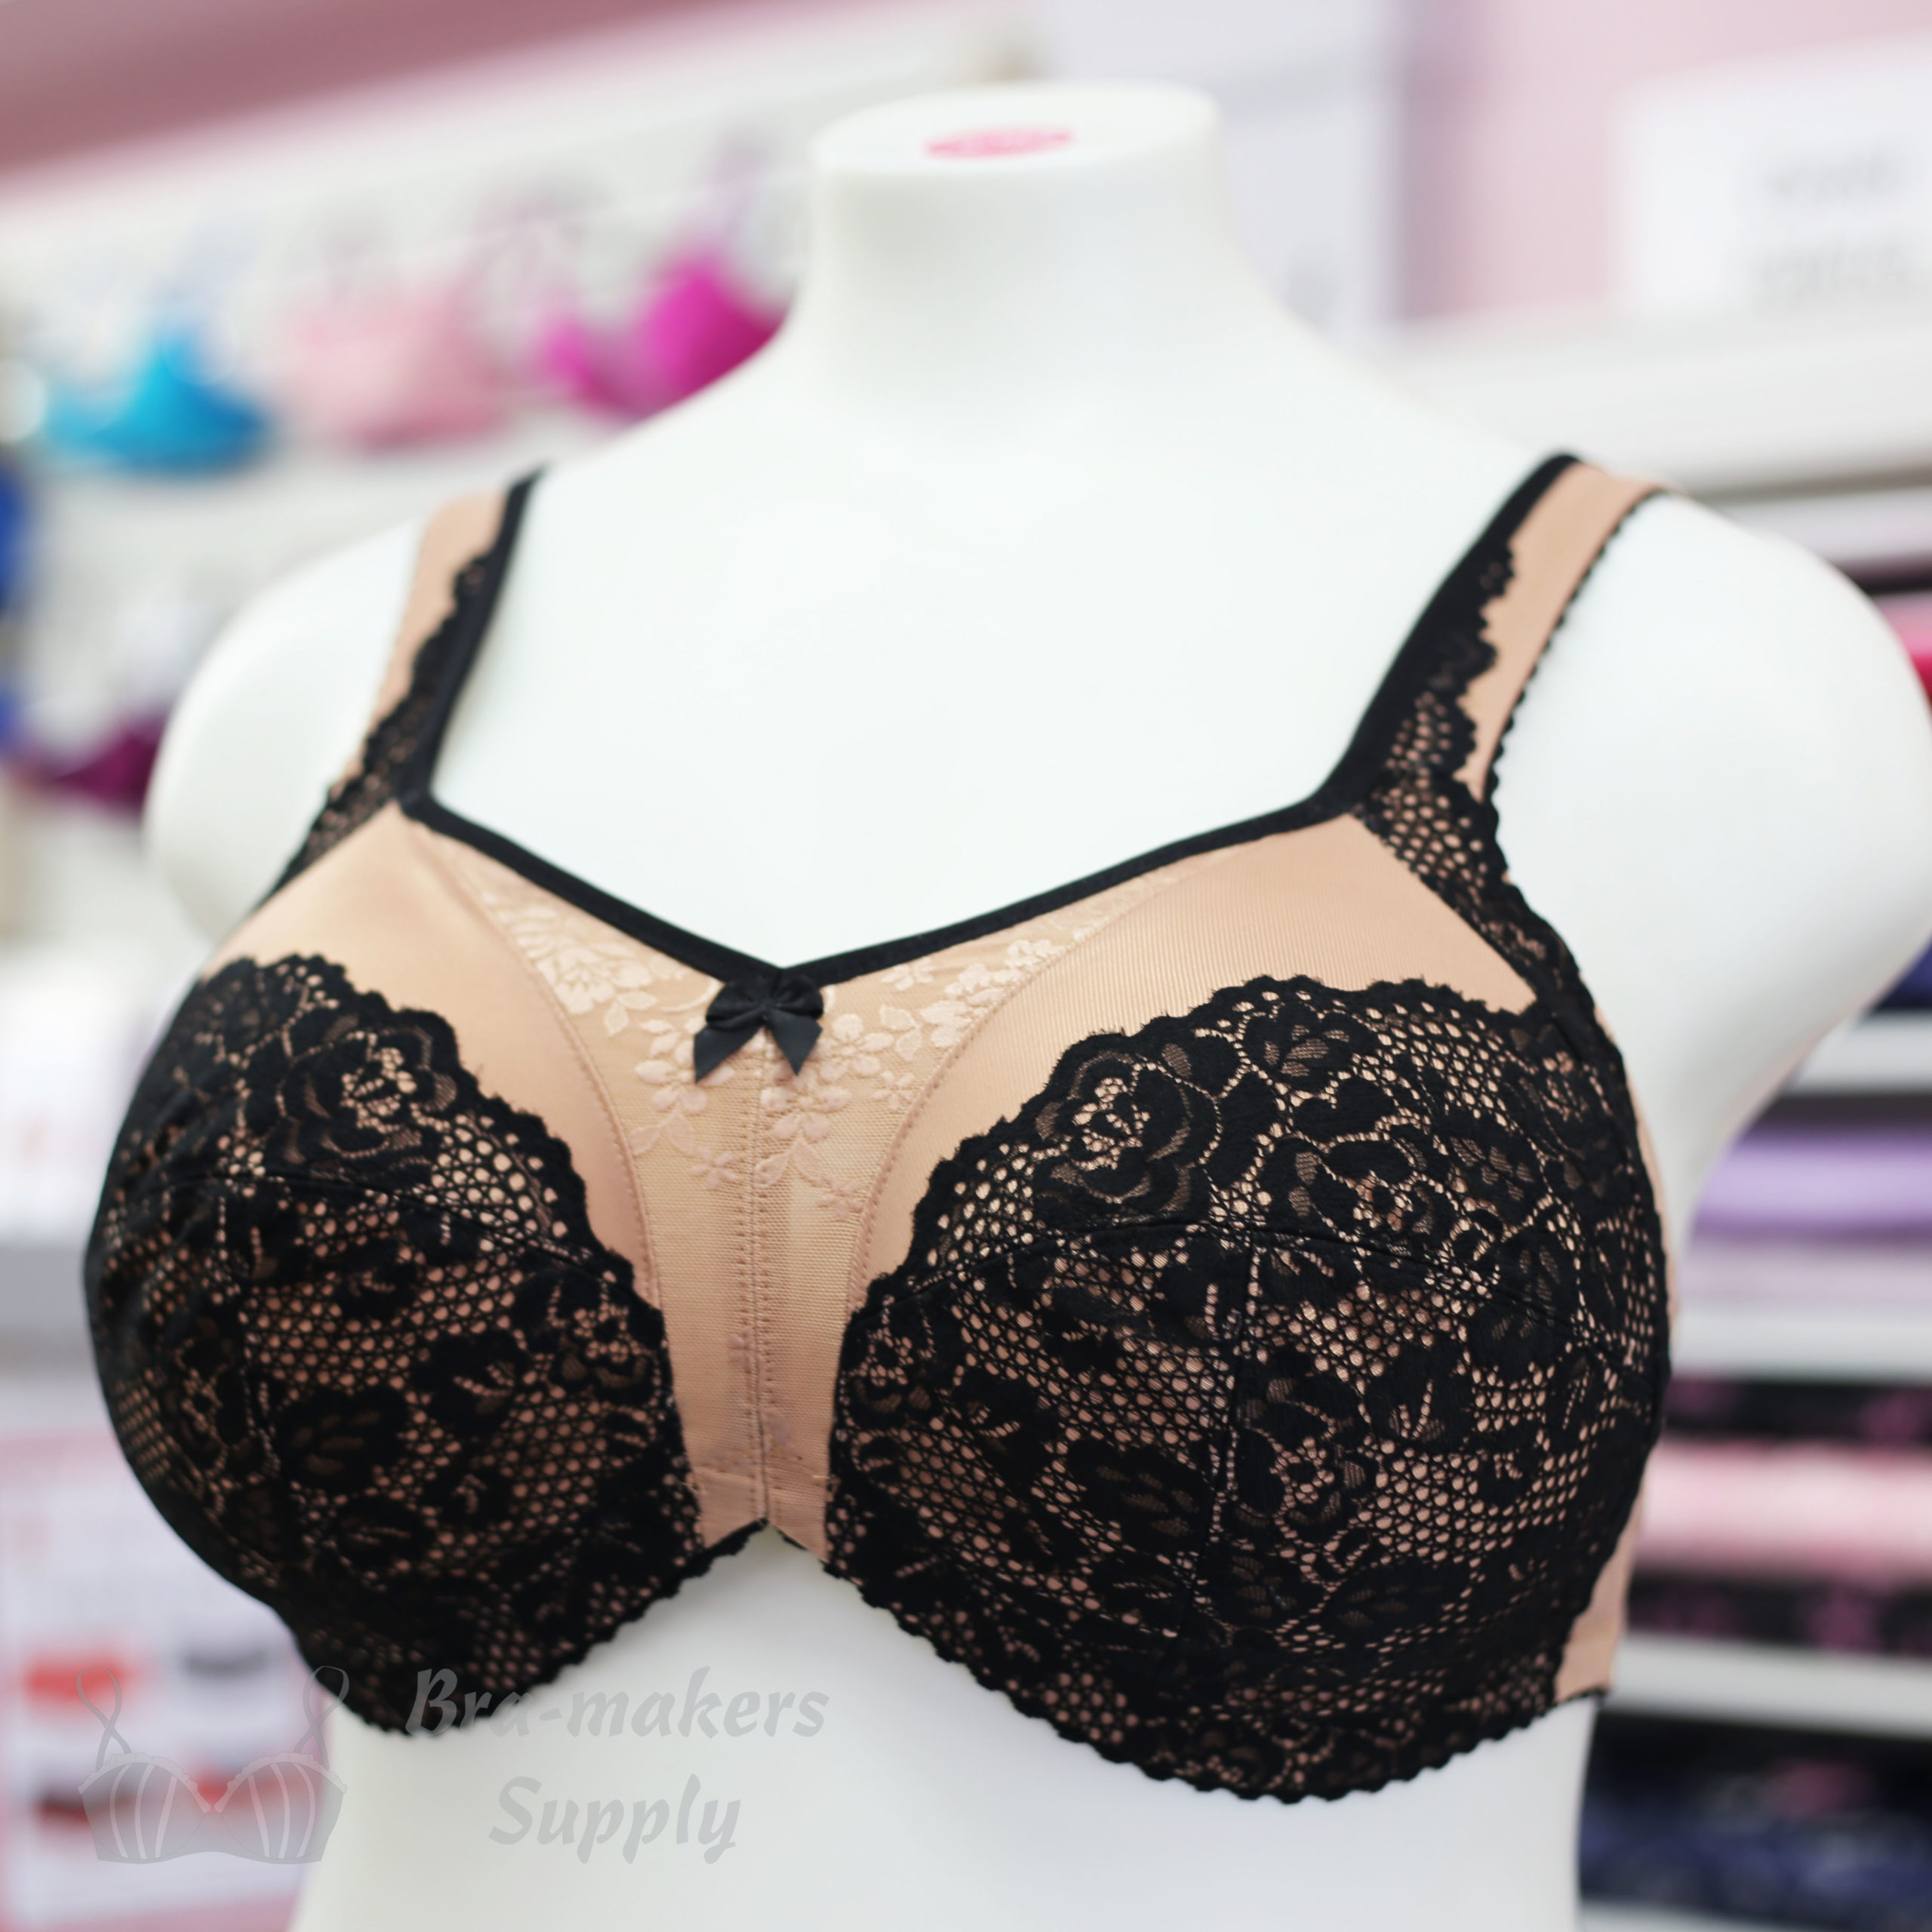 Beginner Bra – Sapphire (Online Class) - Bra-makers Supply the leading  global source for bra making and corset making supplies